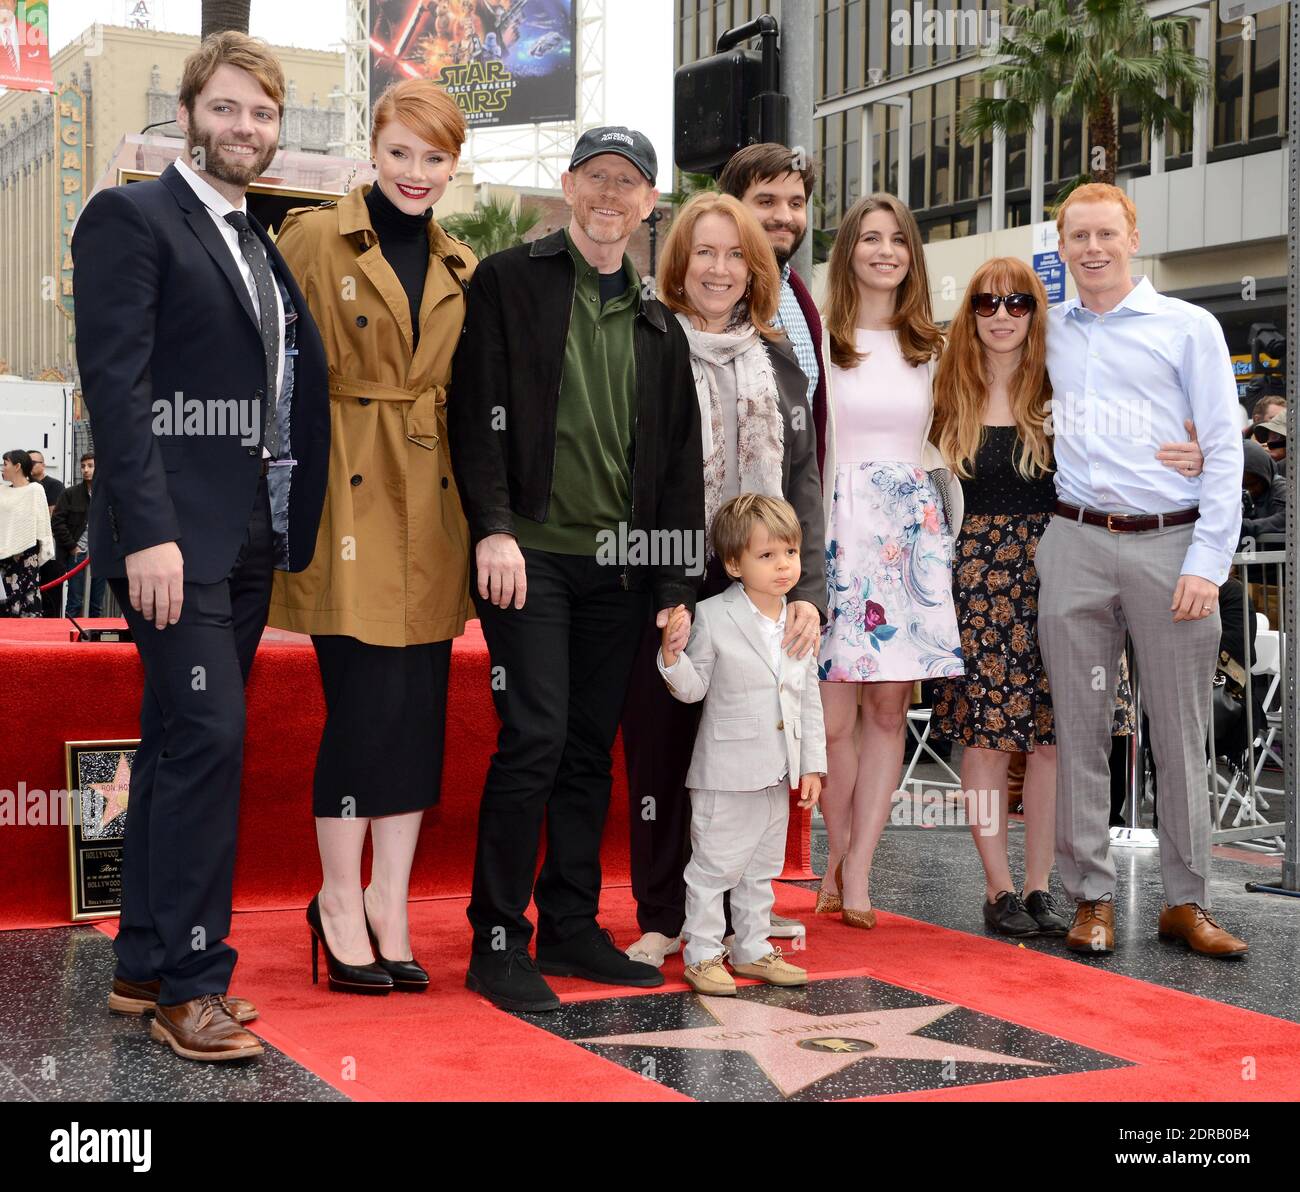 Seth Gabel, Bryce Dallas Howard, Cheryl Howard, Paige Howard and Reed Howard attend the ceremony honoring Ron Howard with his 2nd star on the Hollywood Walk of Fame on December 10, 2015 in Los Angeles, California. Photo by Lionel Hahn/AbacaUsa.com Stock Photo